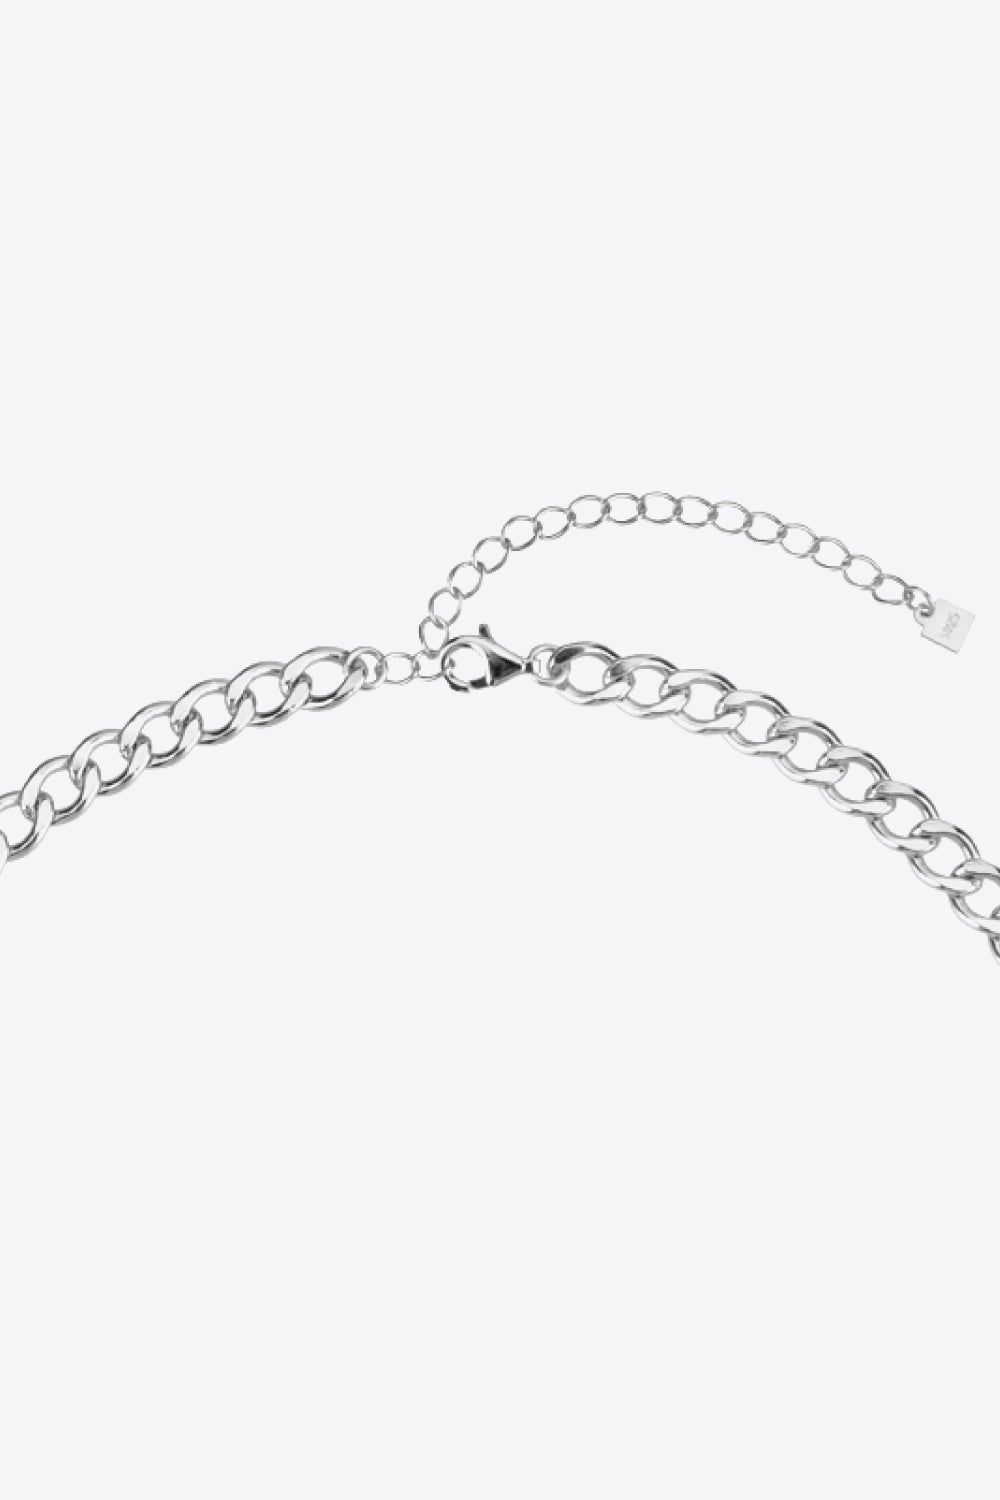 925 Sterling Silver Chain Necklace-Ever Joy